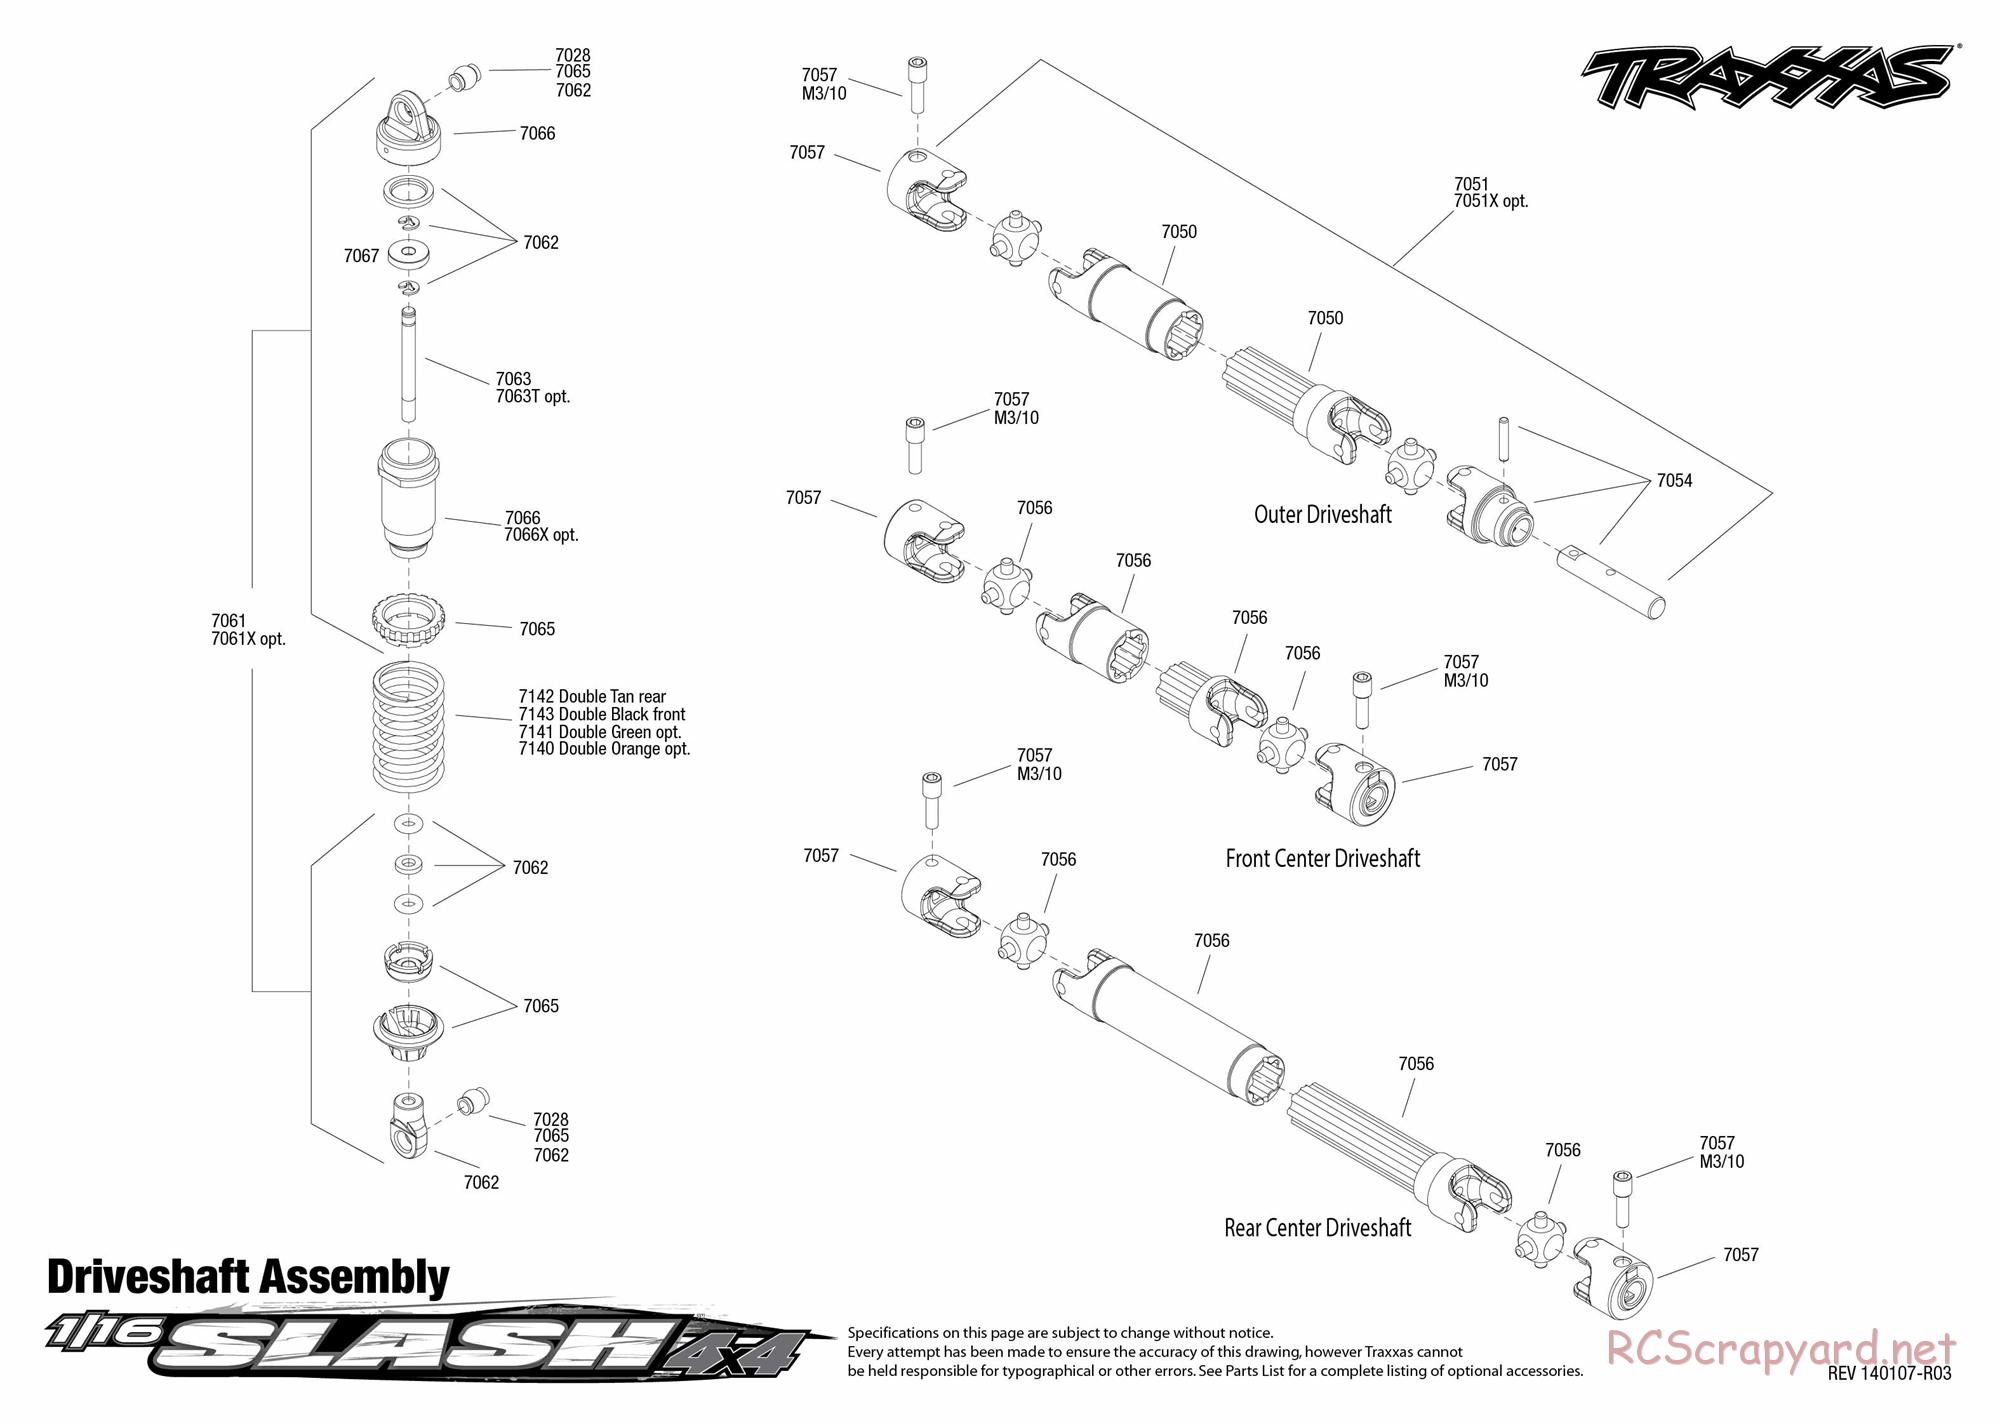 Traxxas - 1/16 Slash 4x4 Brushed (2013) - Exploded Views - Page 2